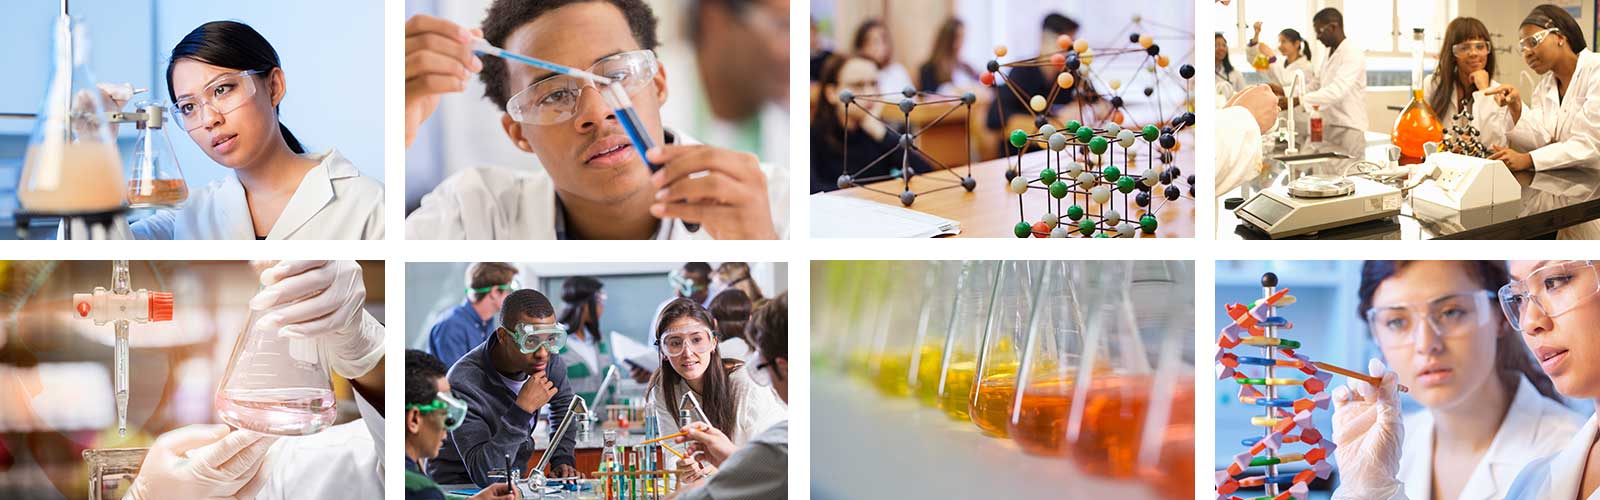 A selection of images of diverse students in a chemistry lab